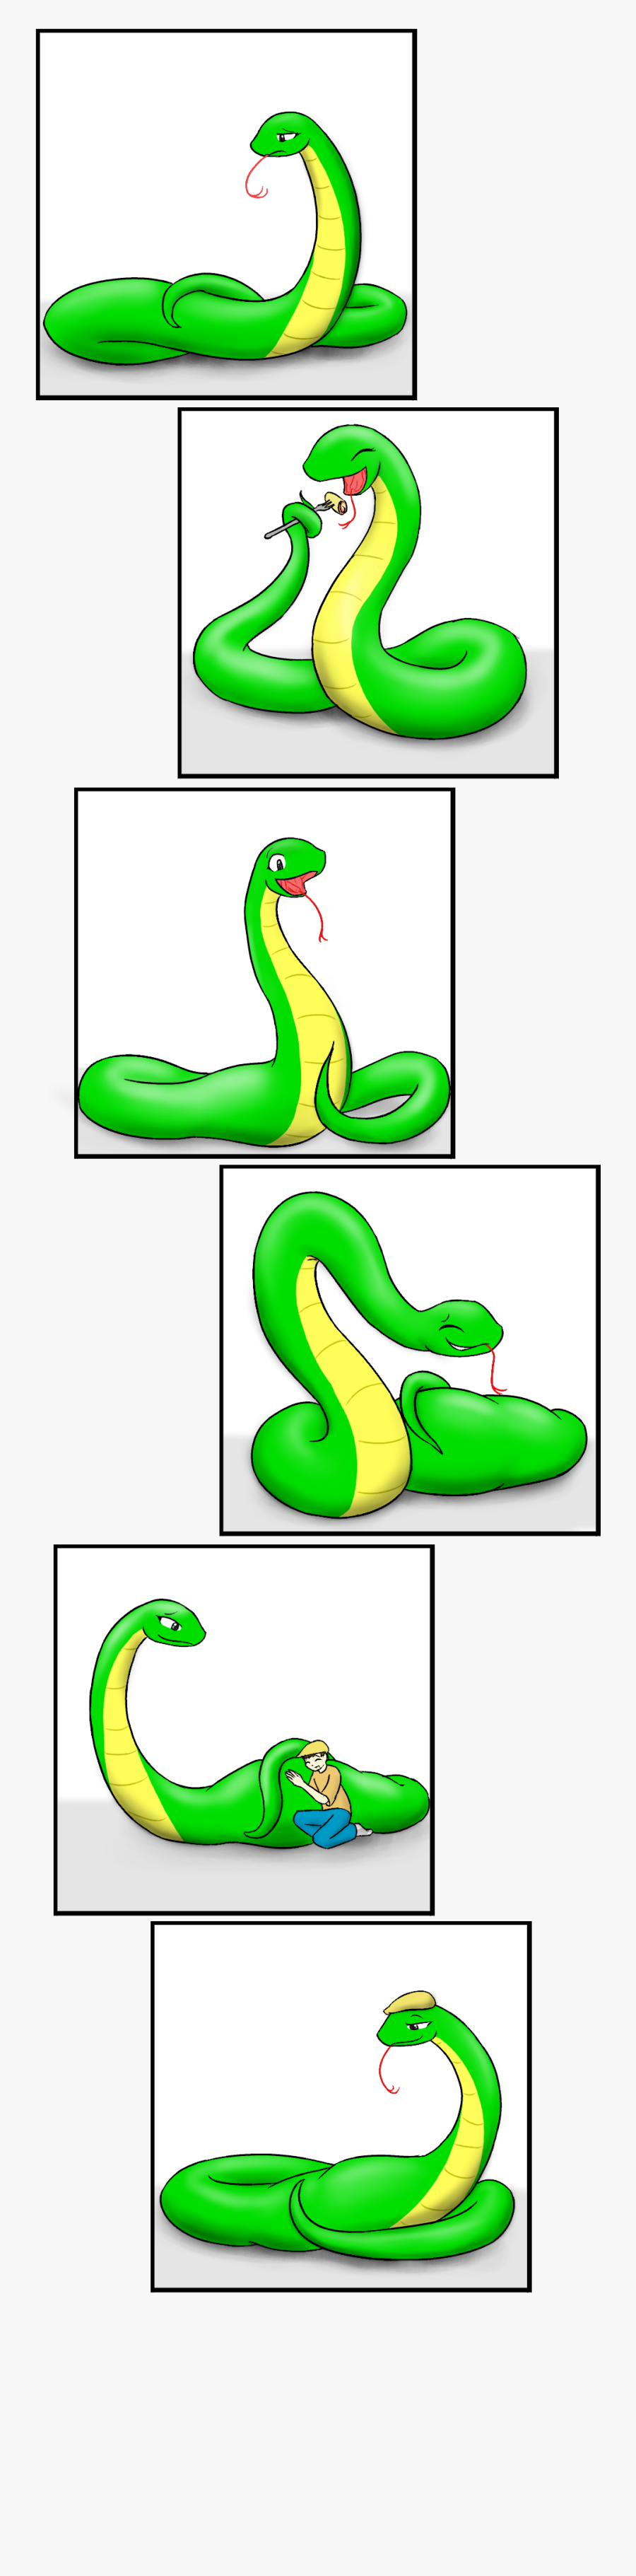 Knight1015 62 38 Tia"s Belly By Knight1015 - Snake, Transparent Clipart